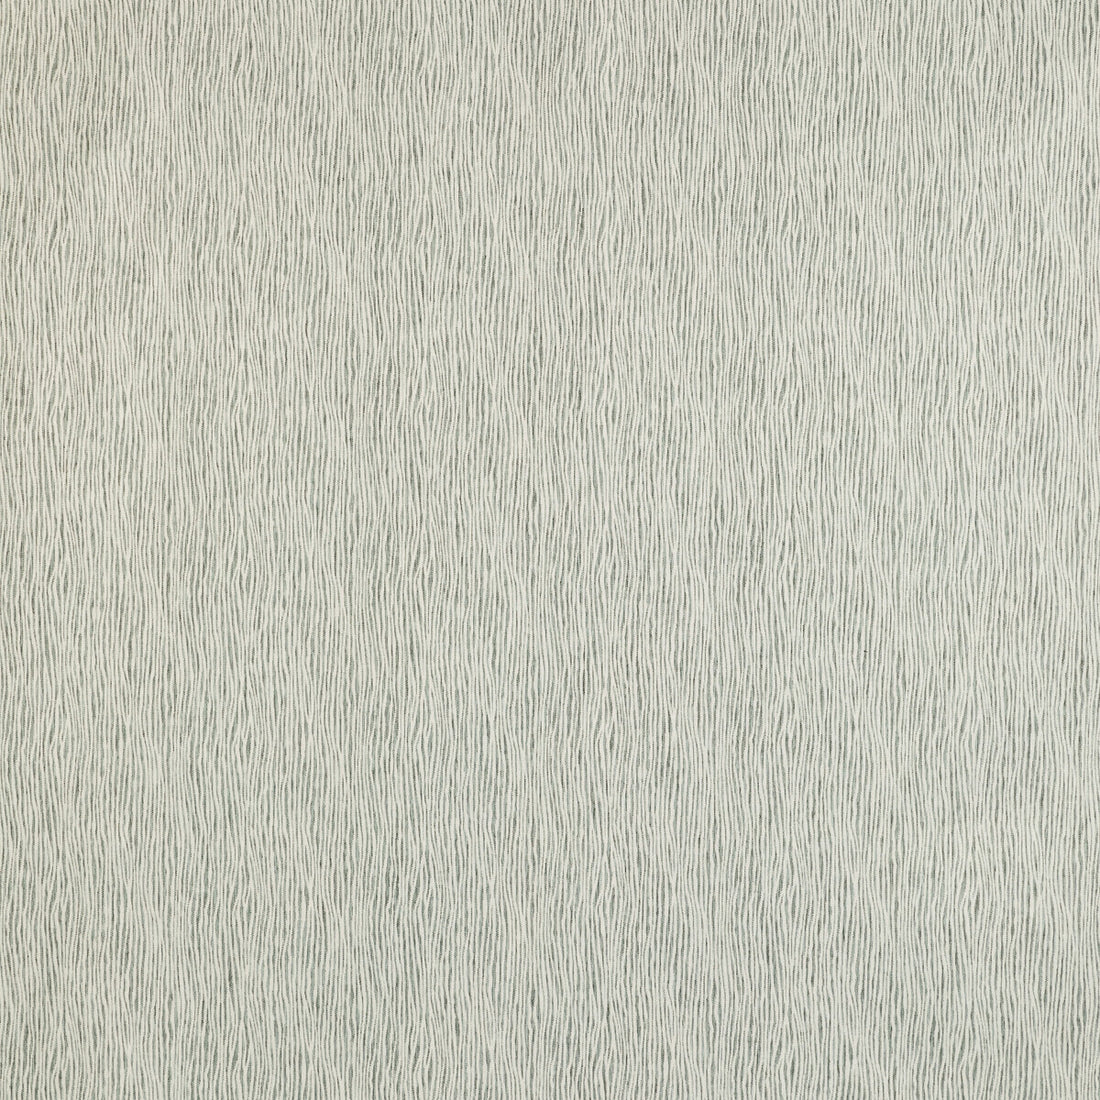 Stringer fabric in mineral color - pattern 35058.35.0 - by Kravet Basics in the Monterey collection